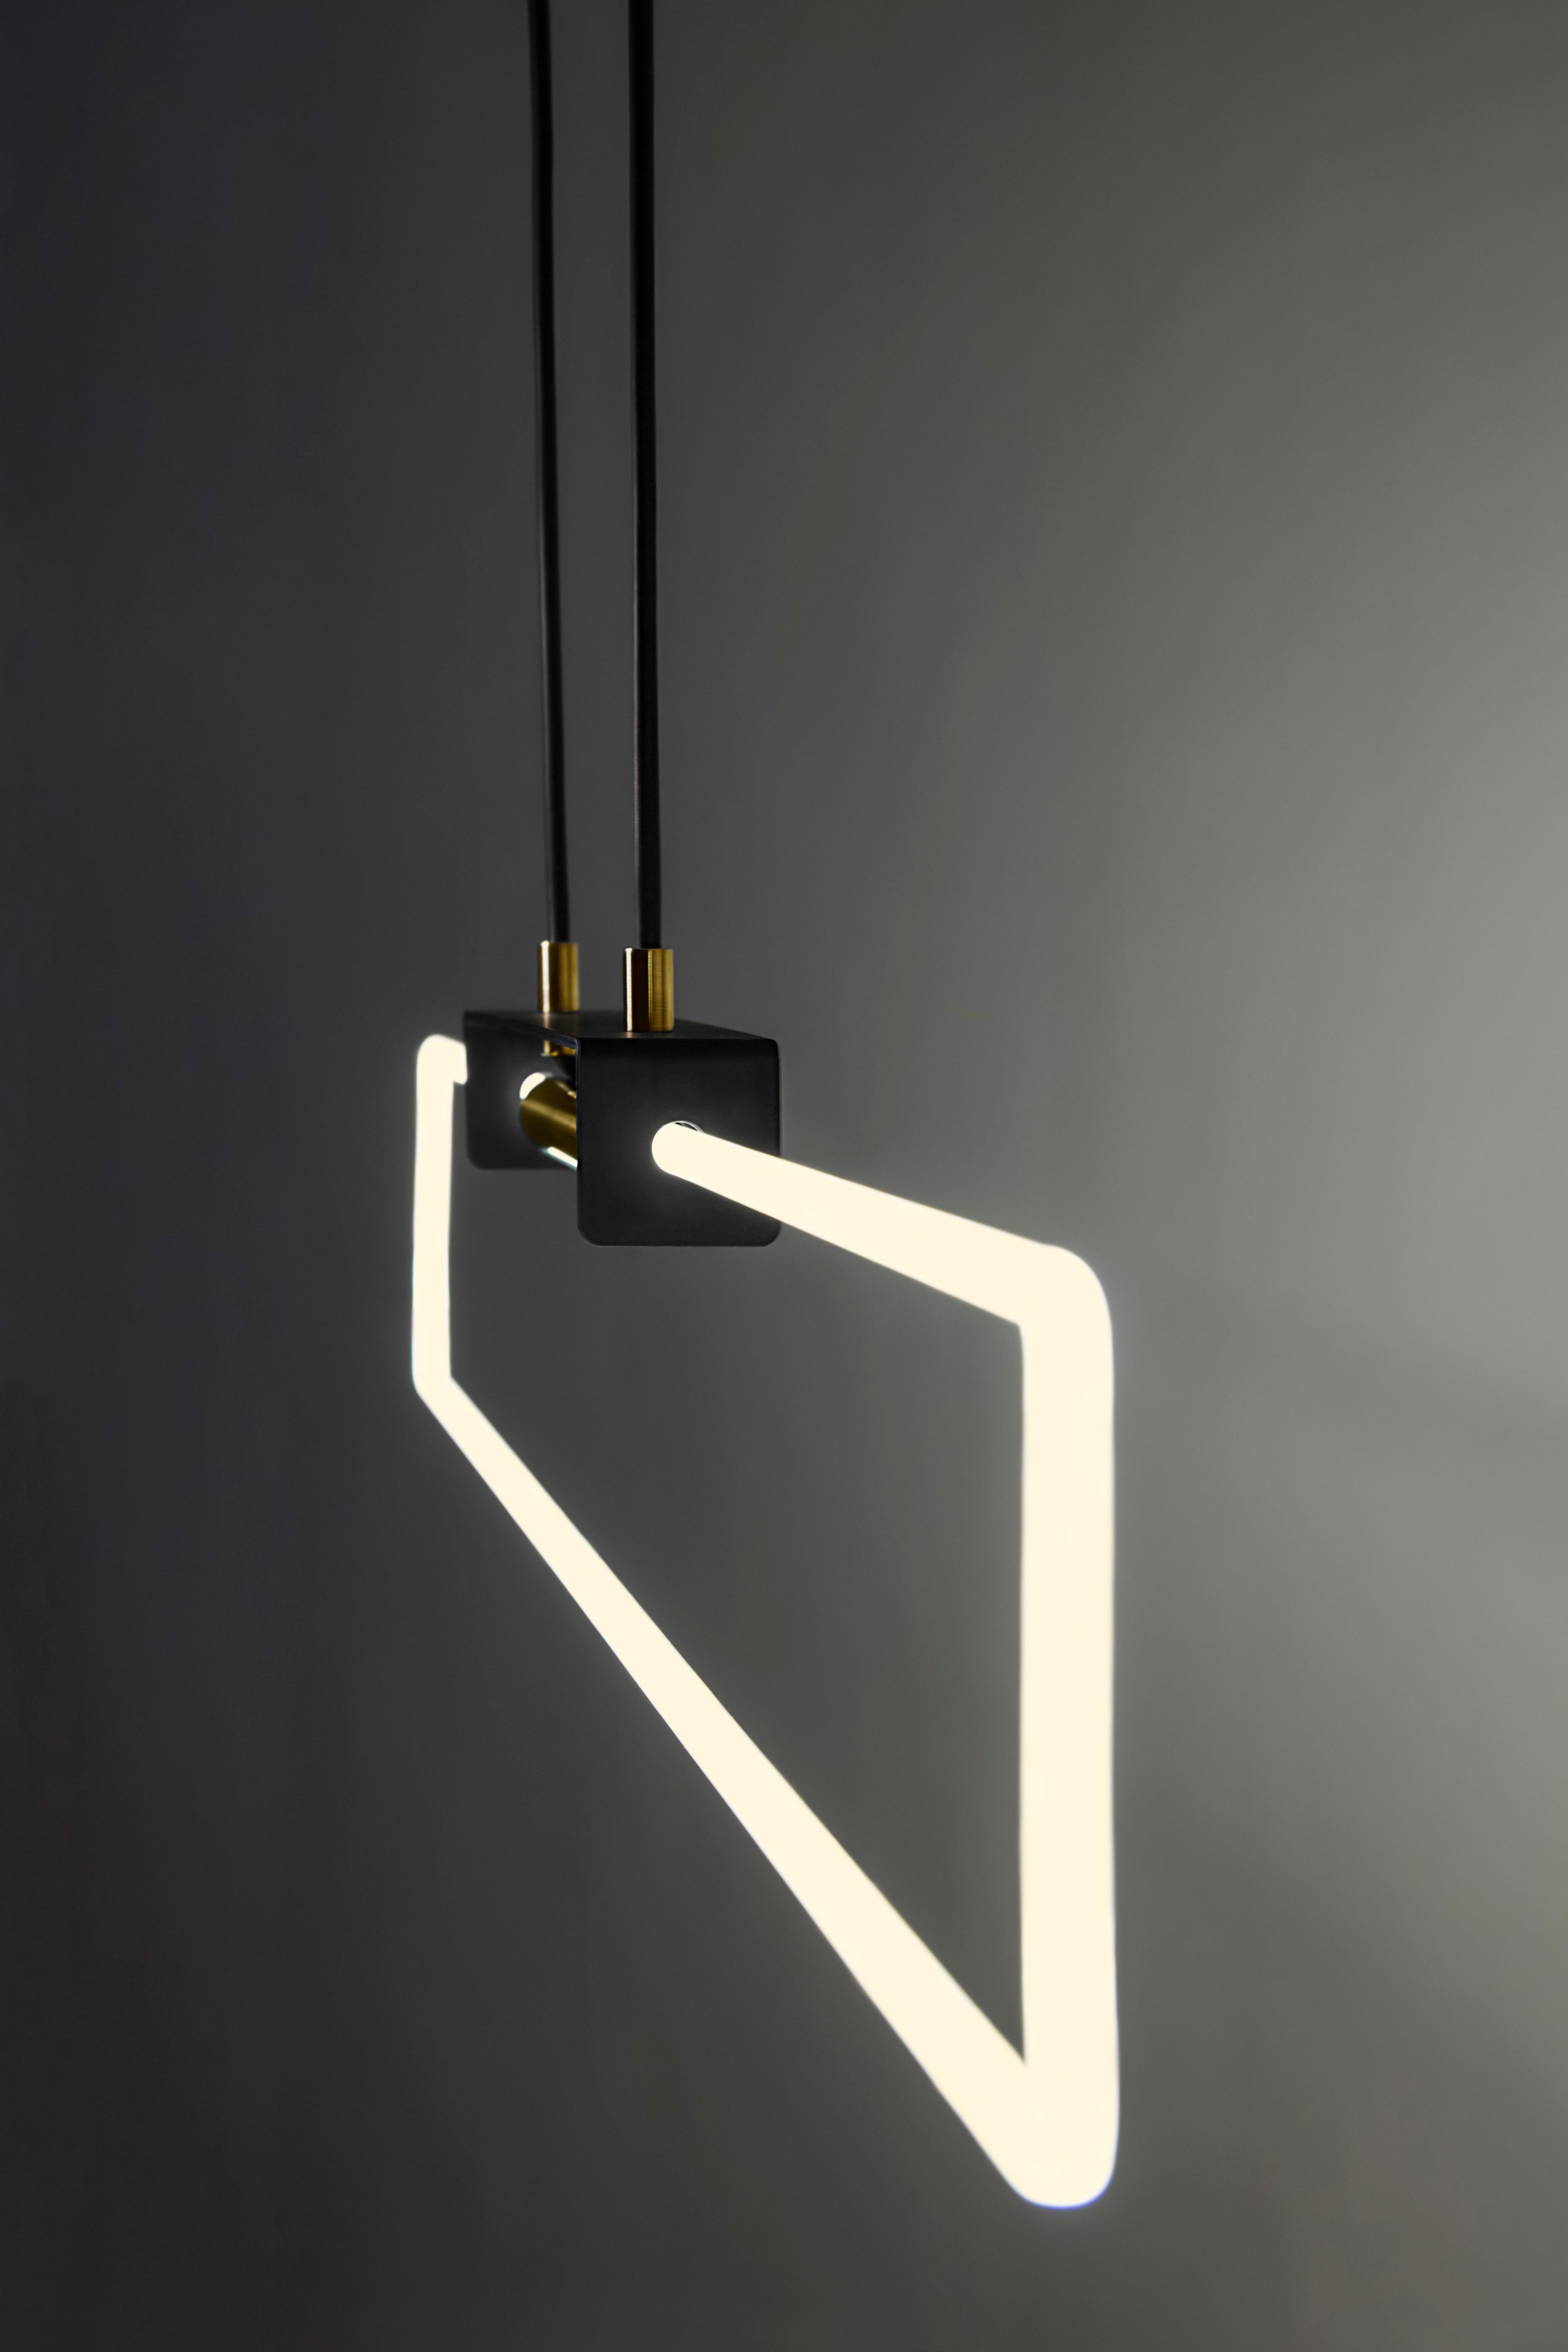 The Ra Suspension is a modern high-end lighting pendant with clean, crisp lines made with a cold cathode neon bent manually.

Neon has long evoked images of harsh, white commercial lighting or bright, coloured flashy signs in the dark. D’Armes